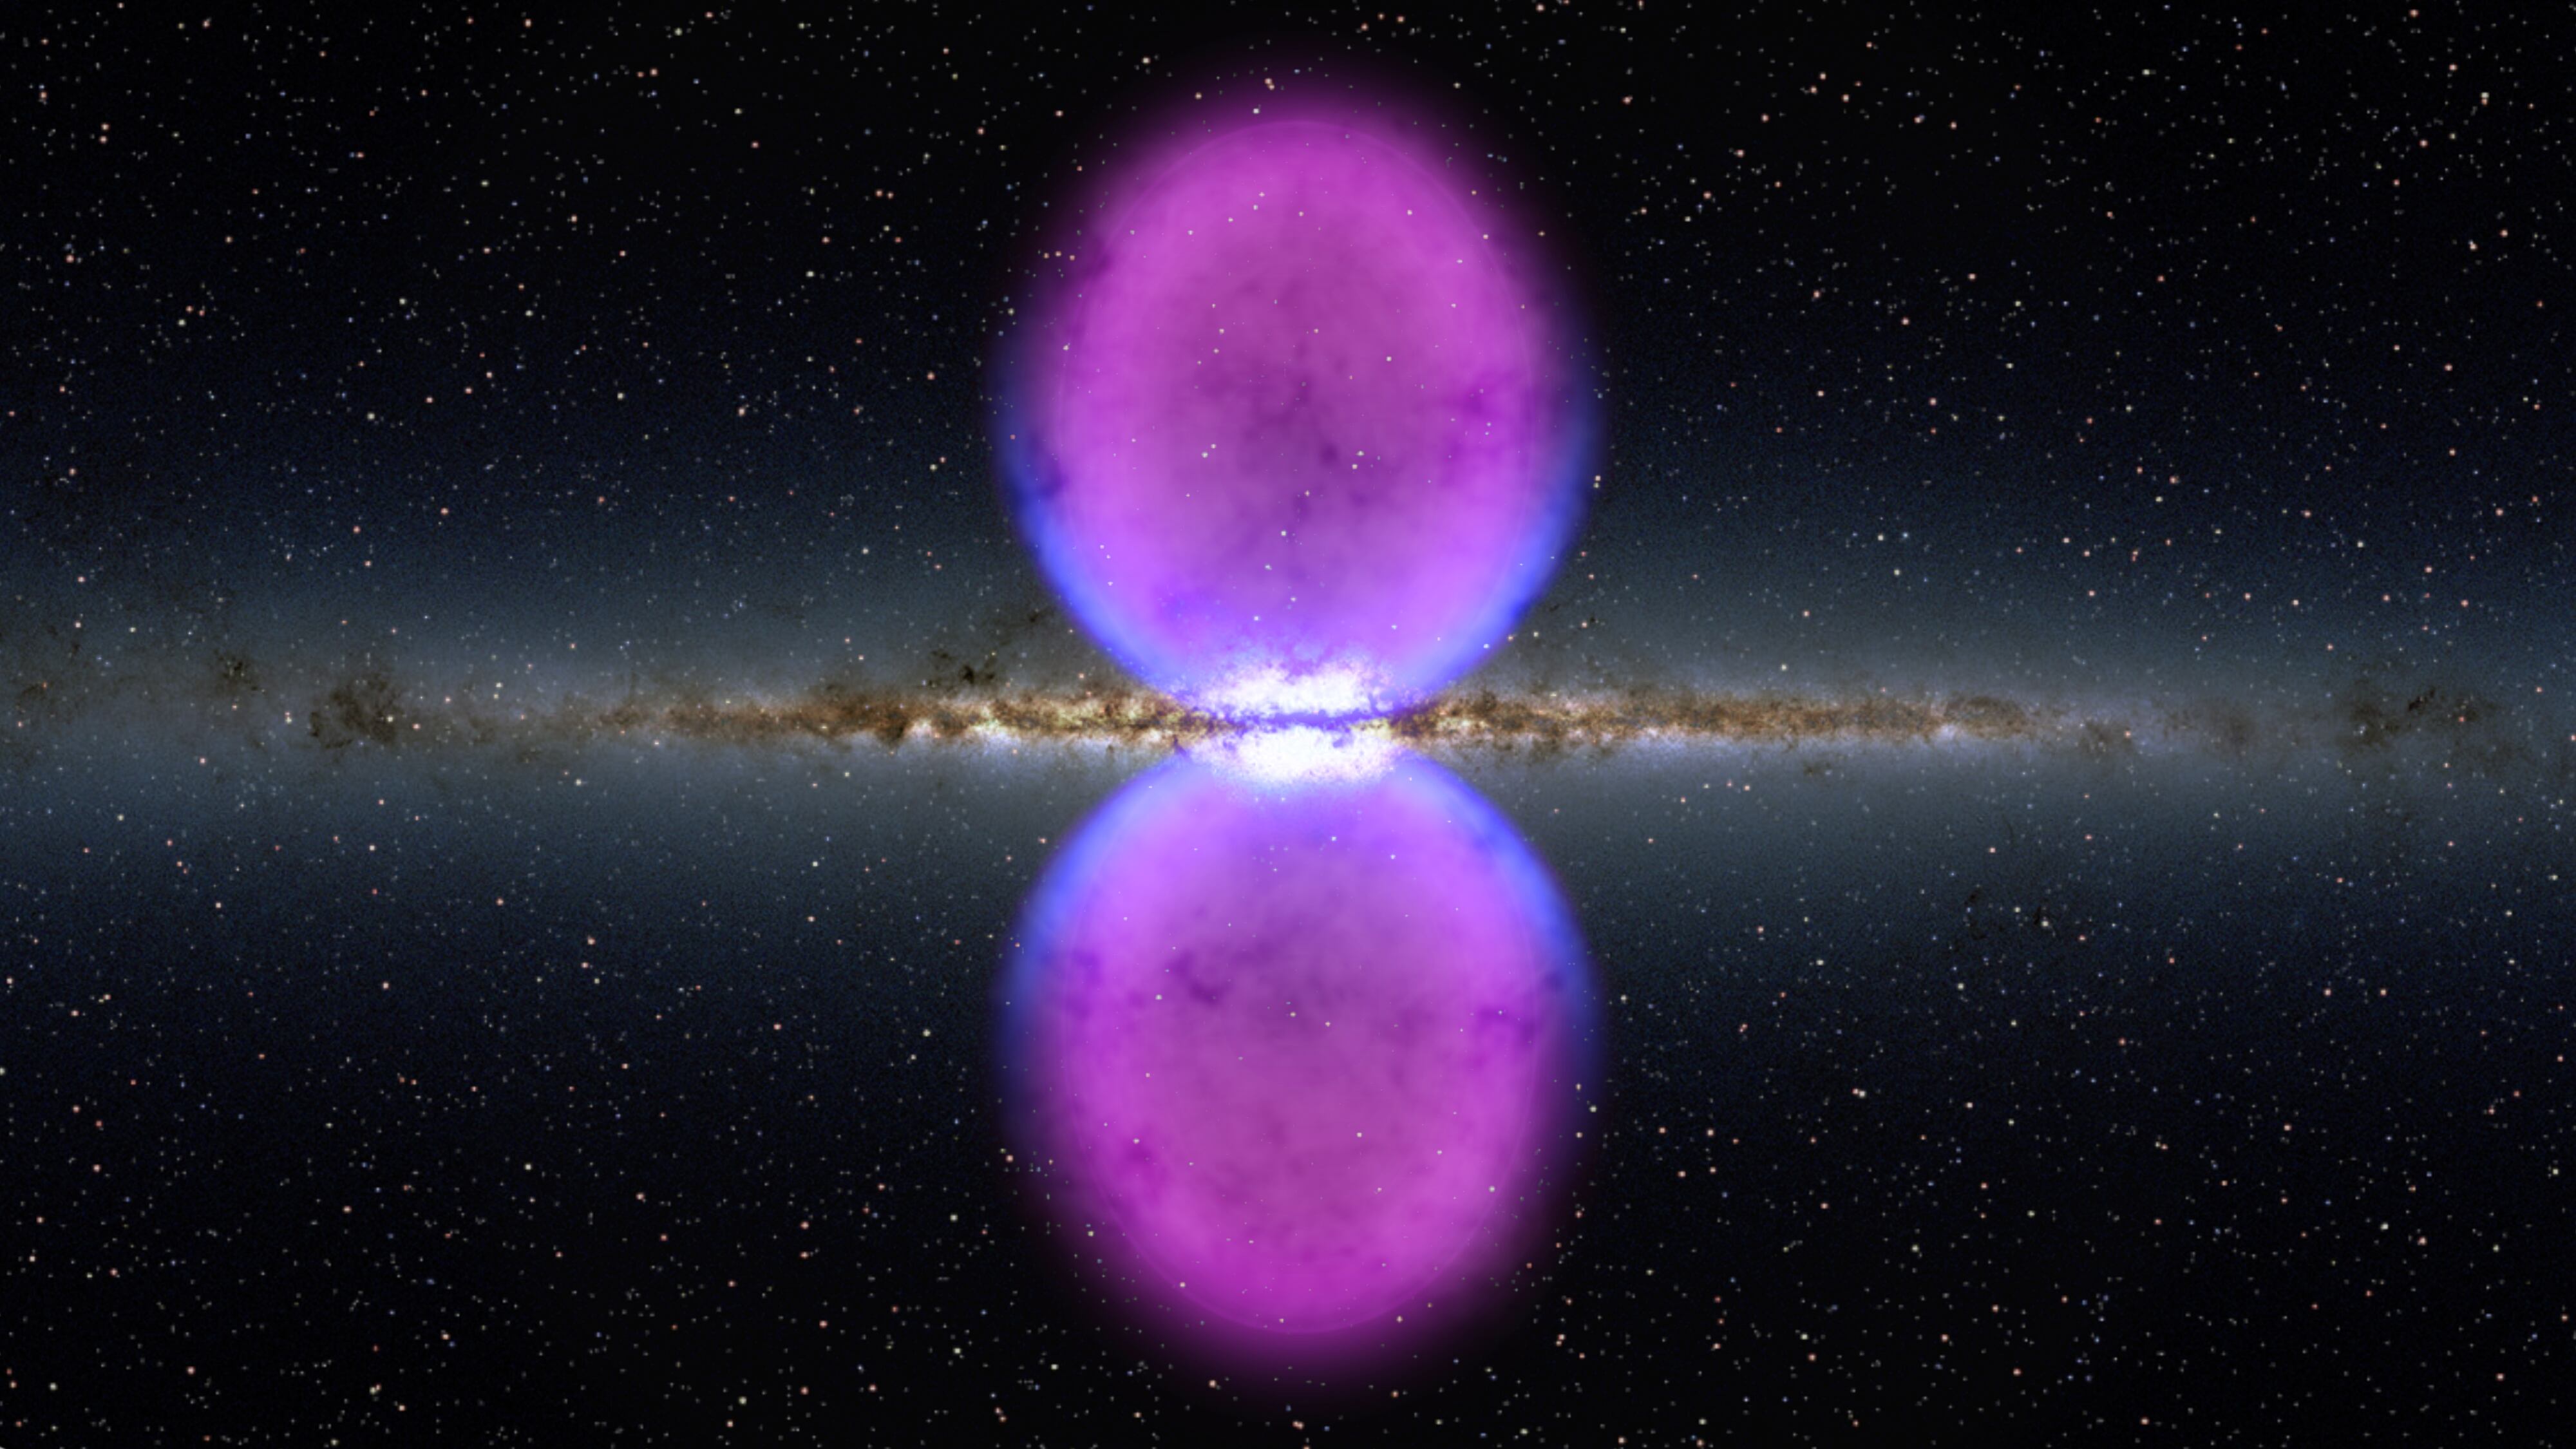 Illustration of the Milky Way with the two gamma-ray bubbles discovered by the 'Fermi' telescope.